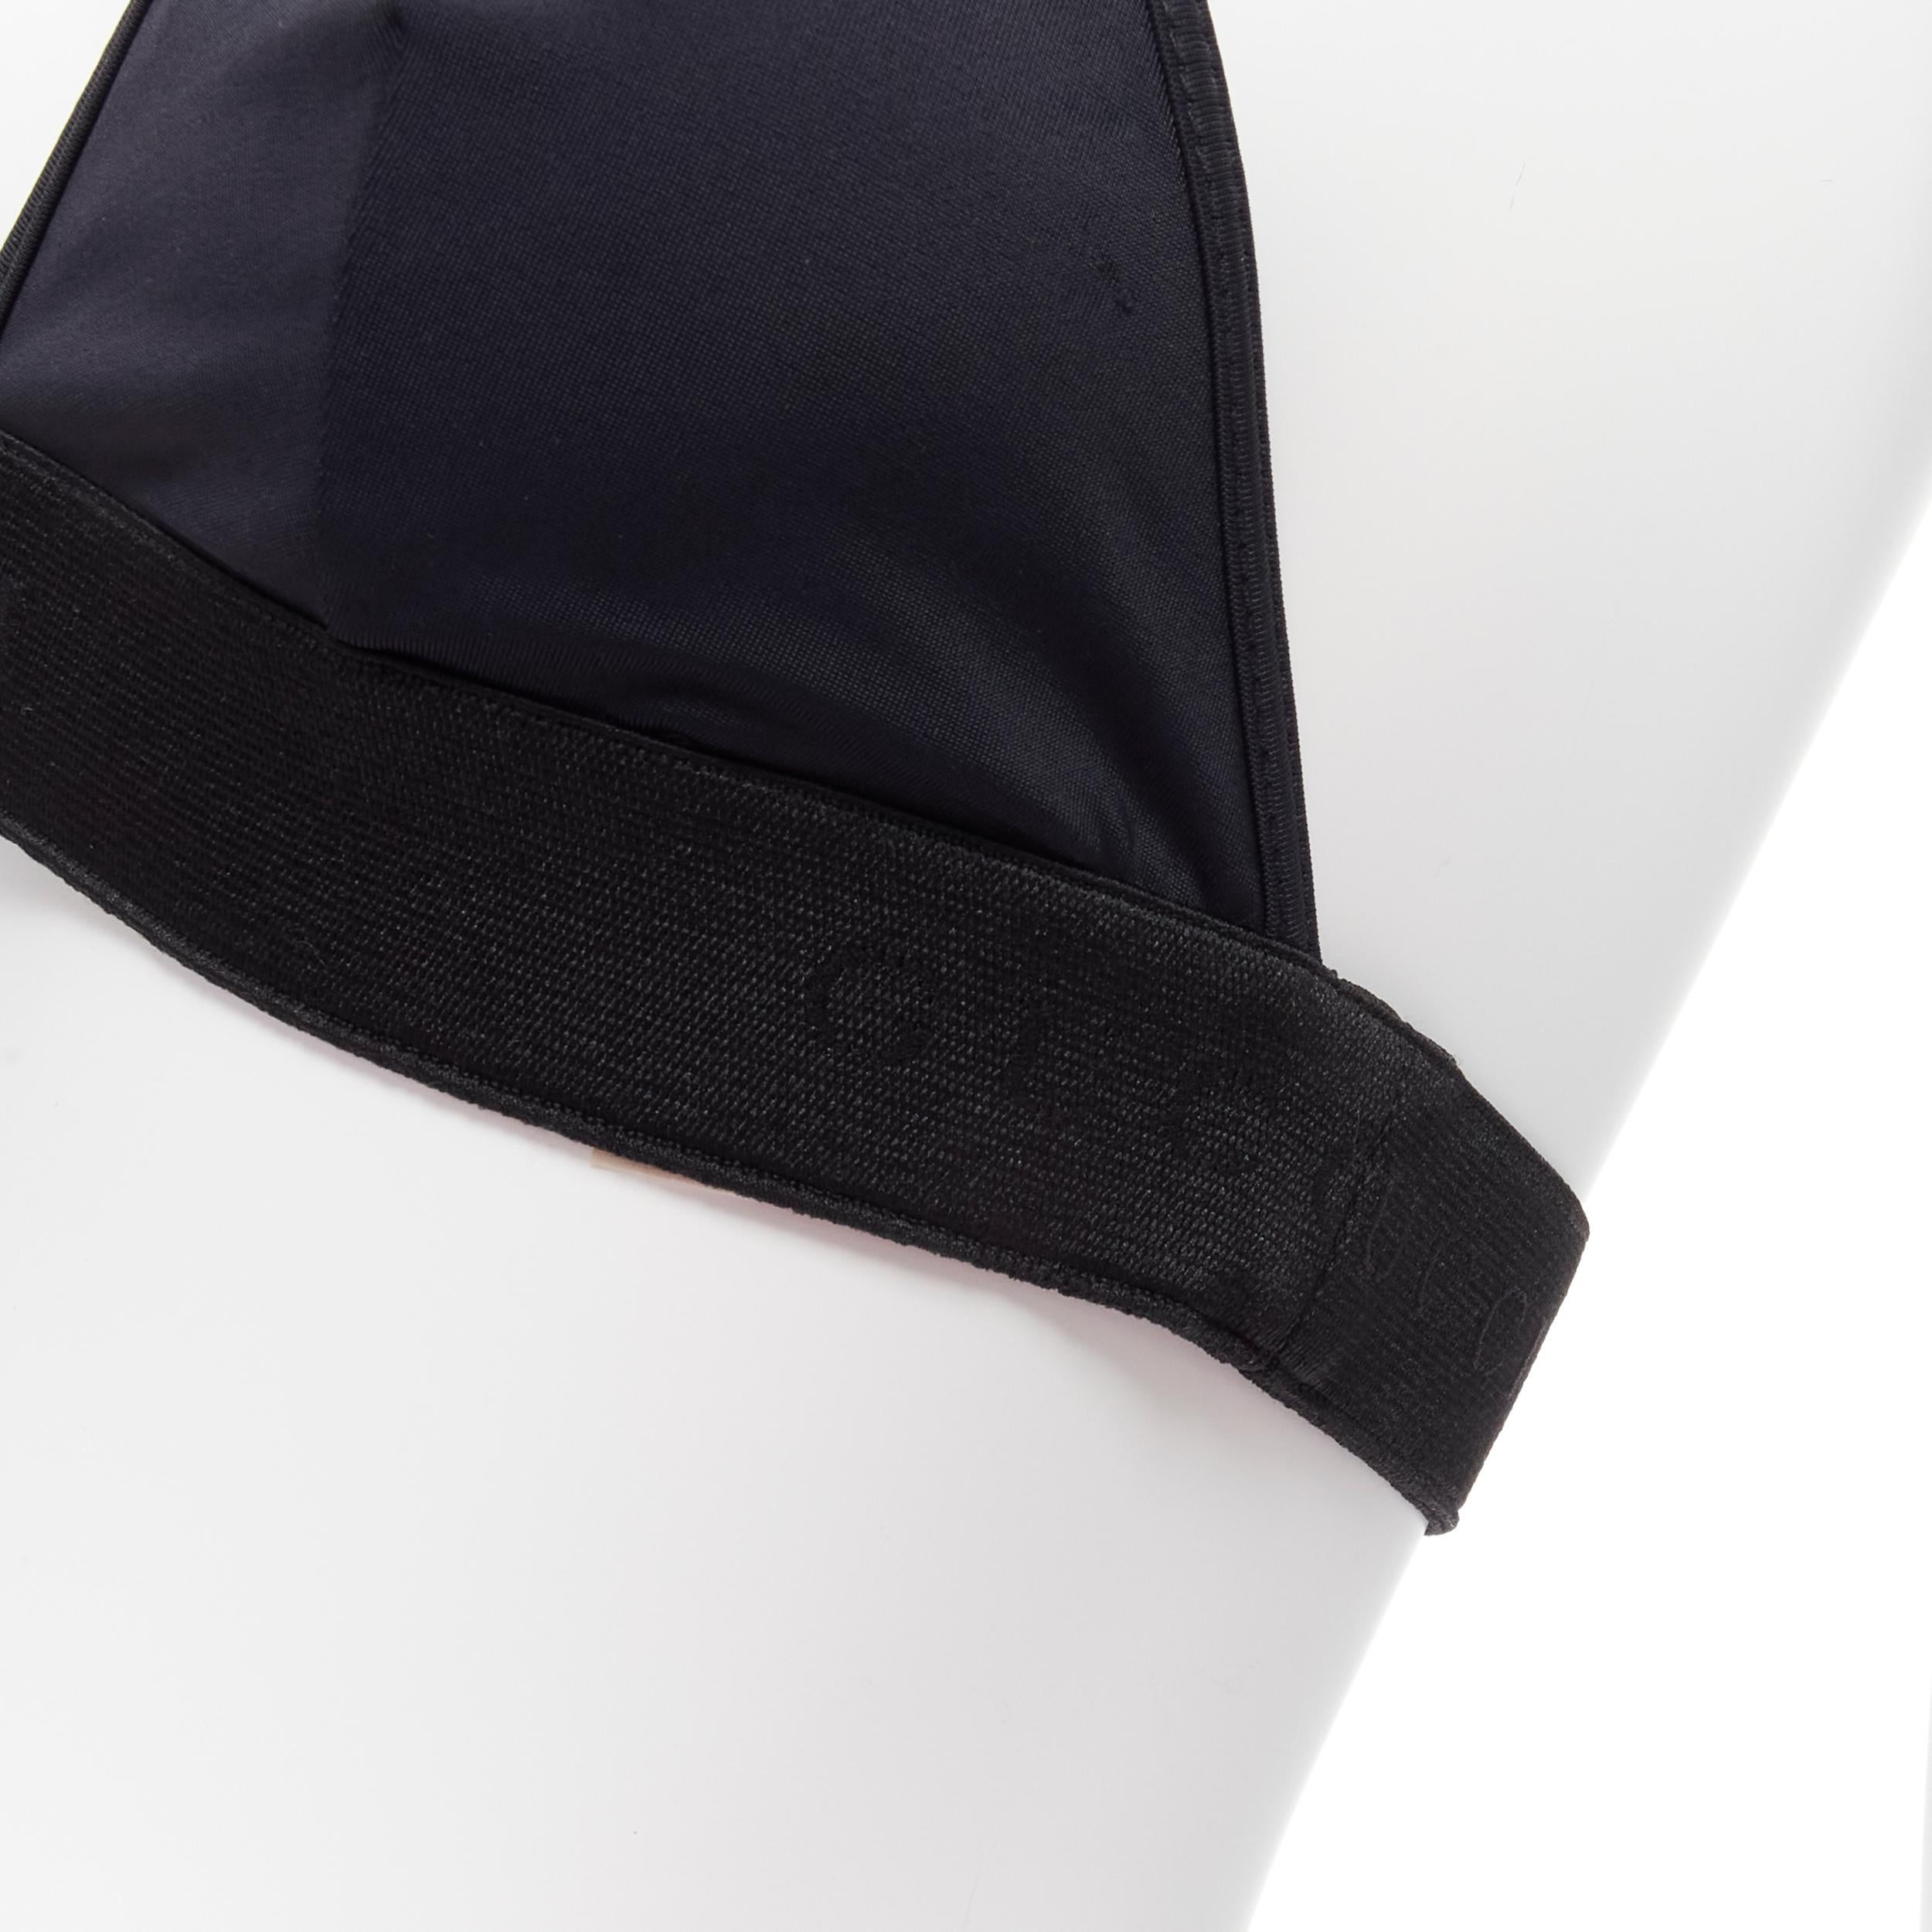 new GUCCI Tom Ford Vintage black GG logo thong bottom 2-pc bikini swim set S
Reference: TGAS/D00174
Brand: Gucci
Designer: Tom Ford
Material: Jersey
Color: Black
Pattern: Solid
Closure: Pull On
Extra Details: Discreet GUCCI logo on elastic